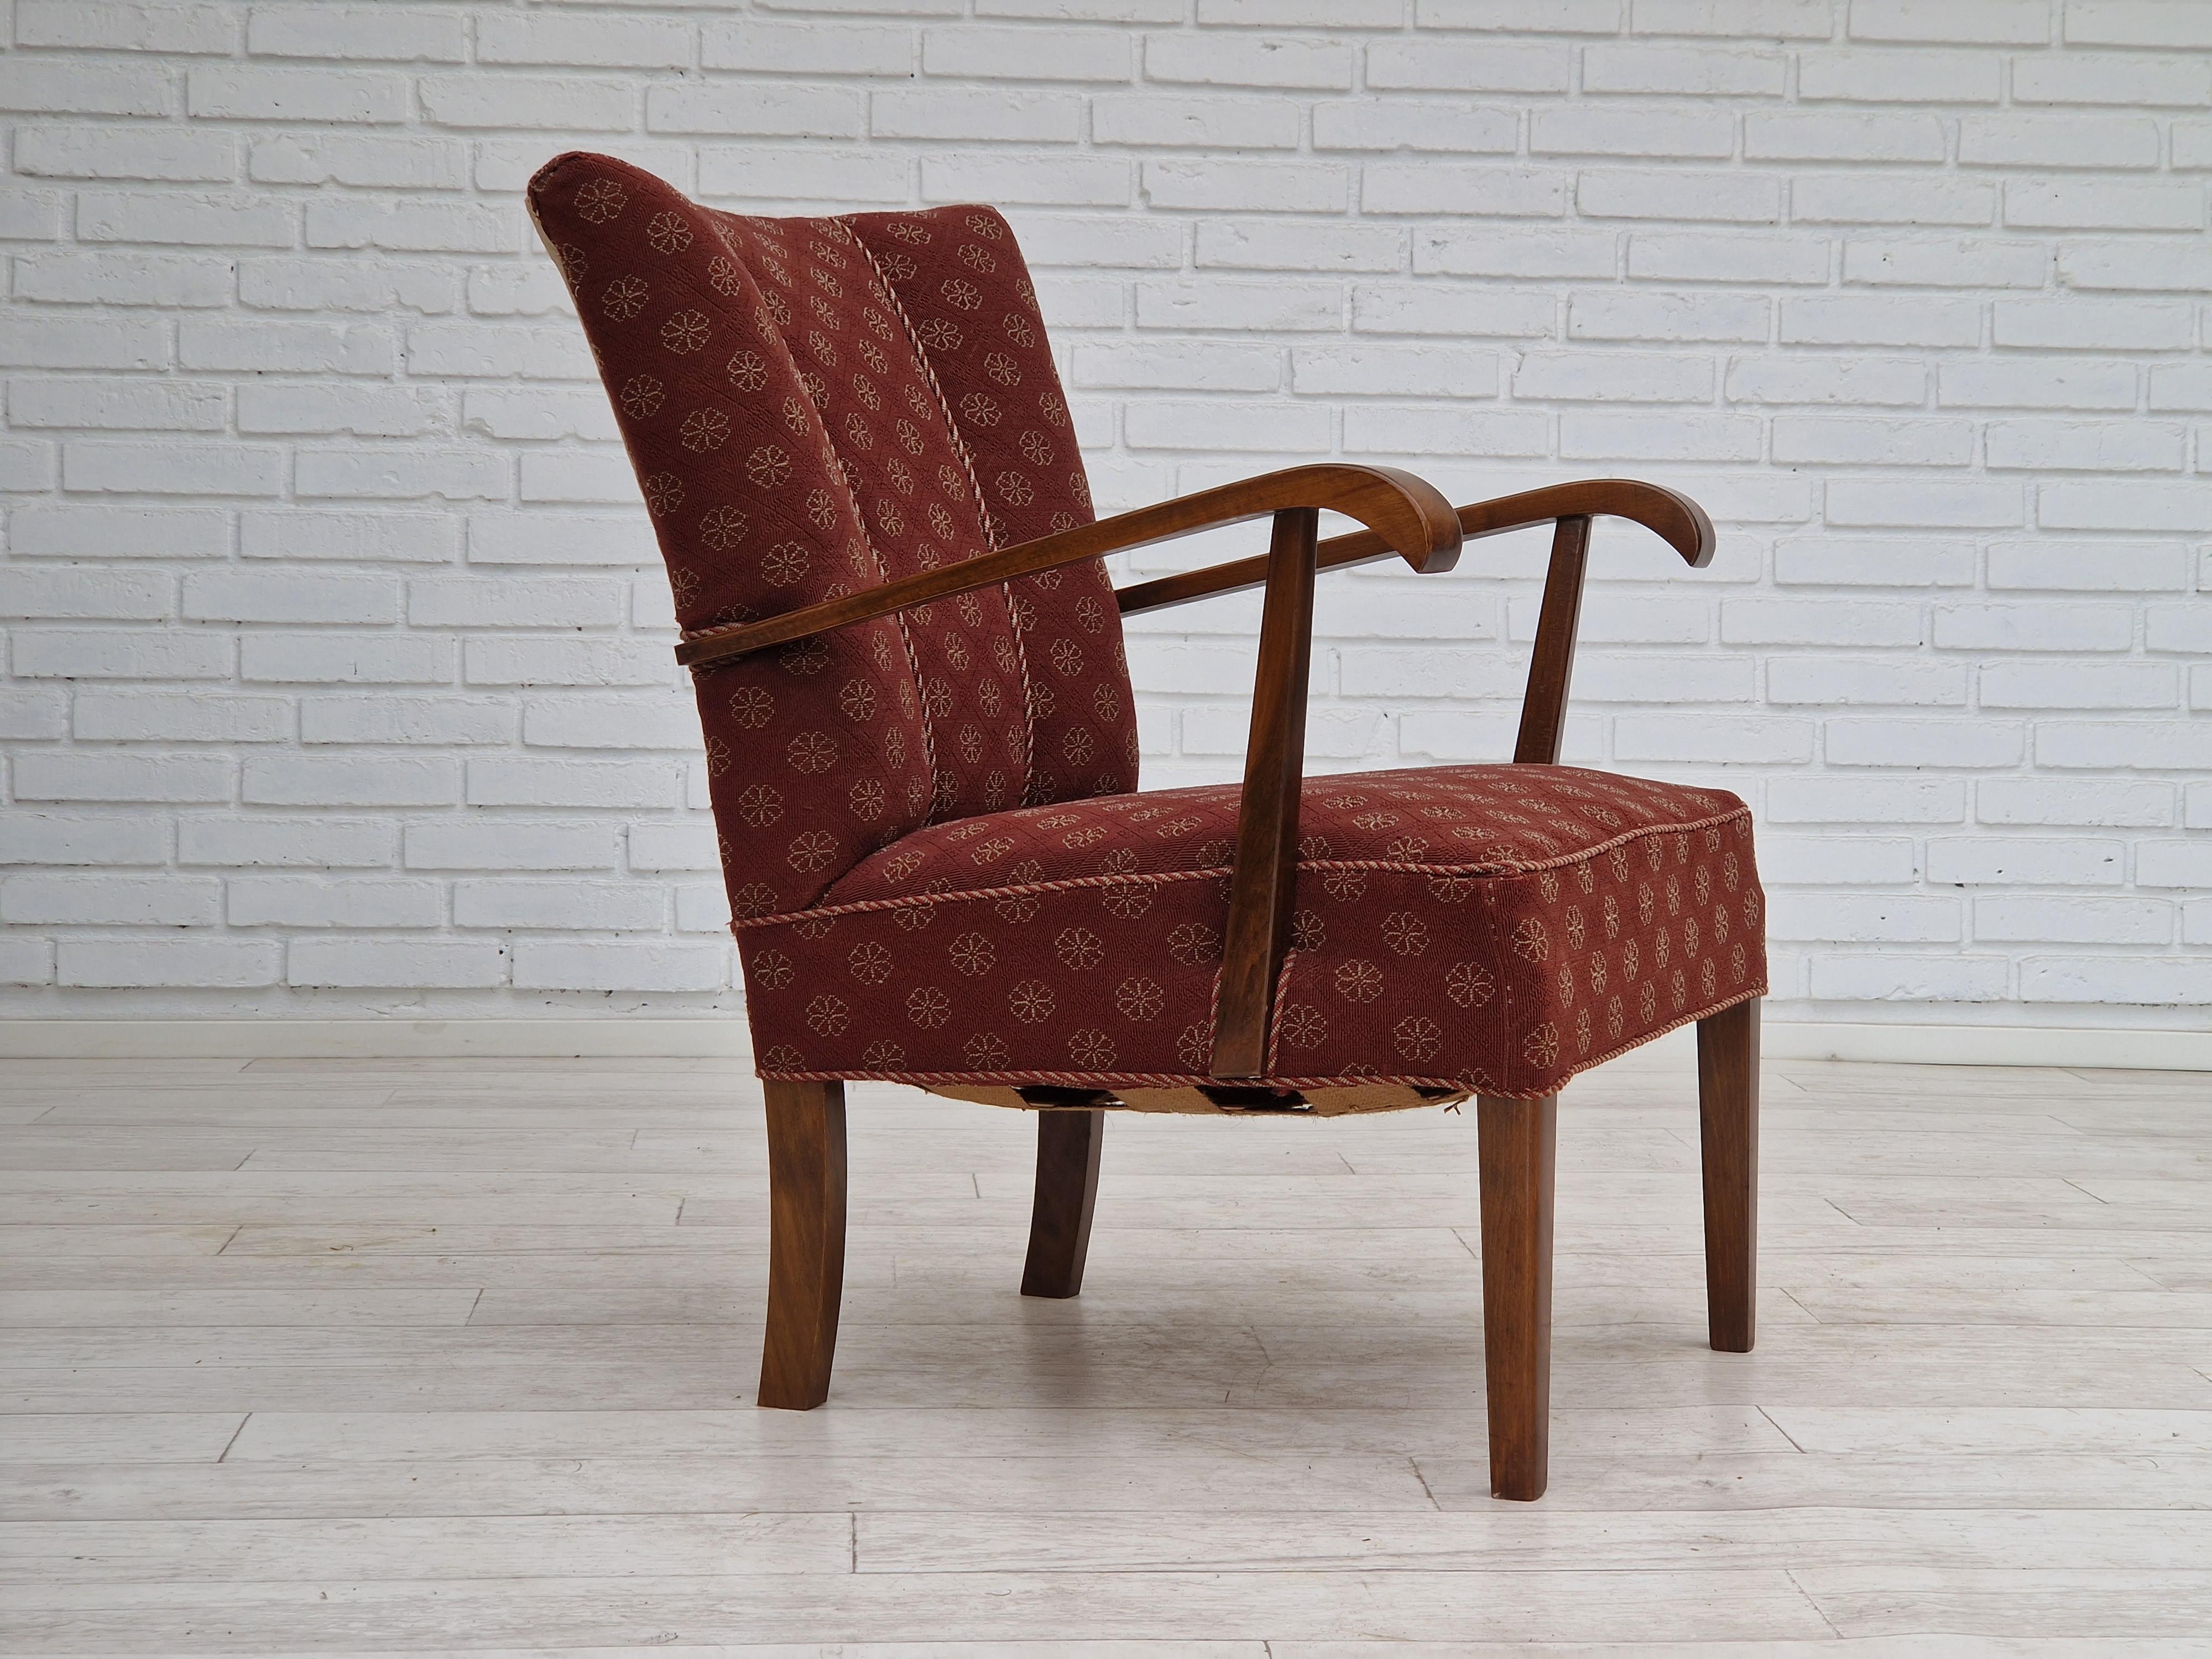 1950s, Danish design. Original armchair in very good condition. No smells and no stains. Original brown cotton fabric in two colors. Legs and armrest in dark lacquered beechwood. Brass springs in the seat.